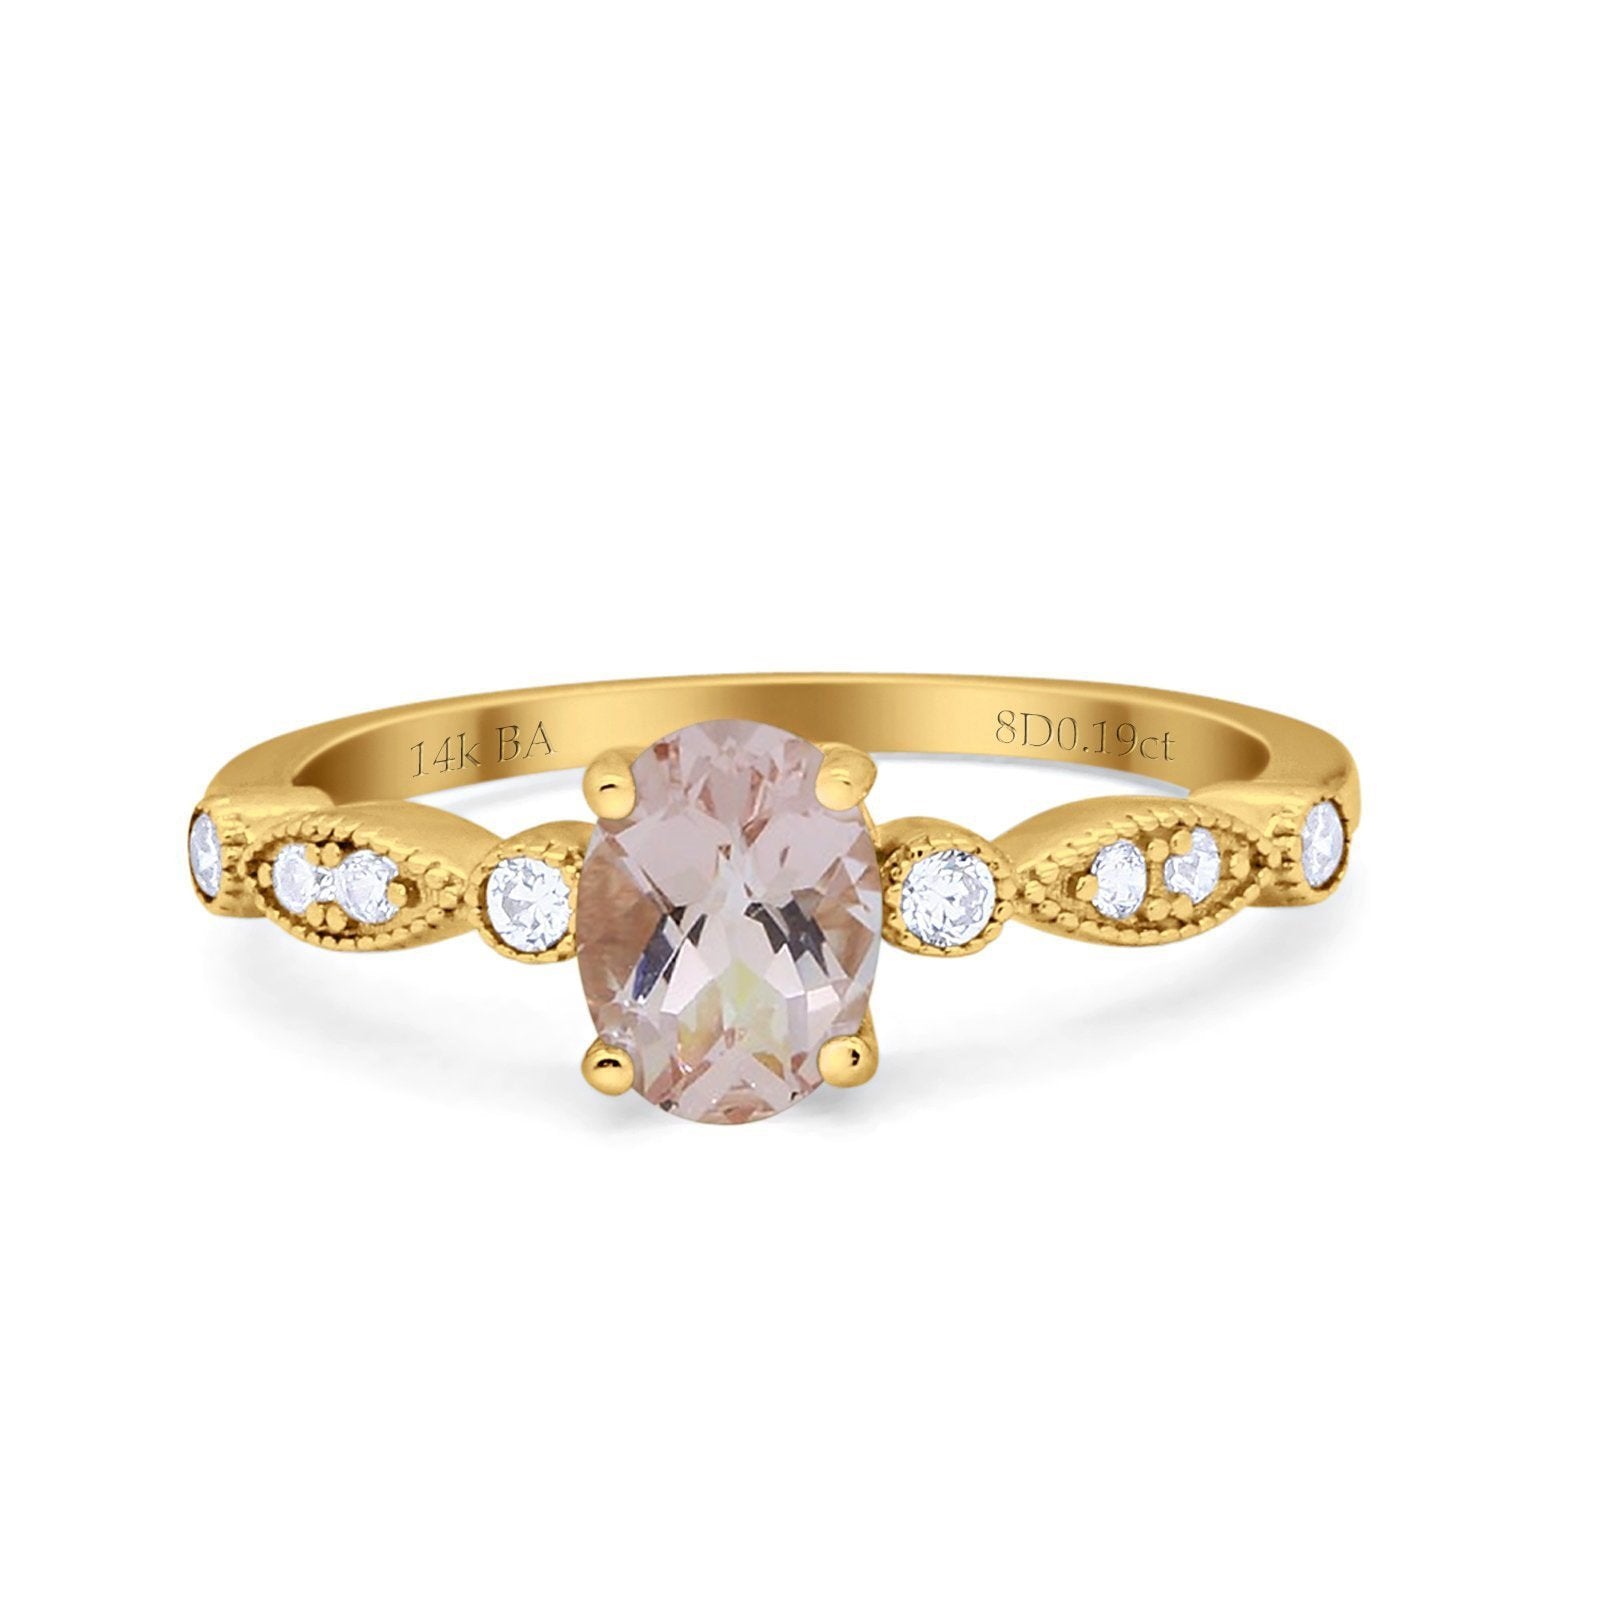 14K Yellow Gold 1.4ct Oval Vintage Style 8mmx6mm G SI Natural Morganite Diamond Engagement Wedding Ring Size 6.5